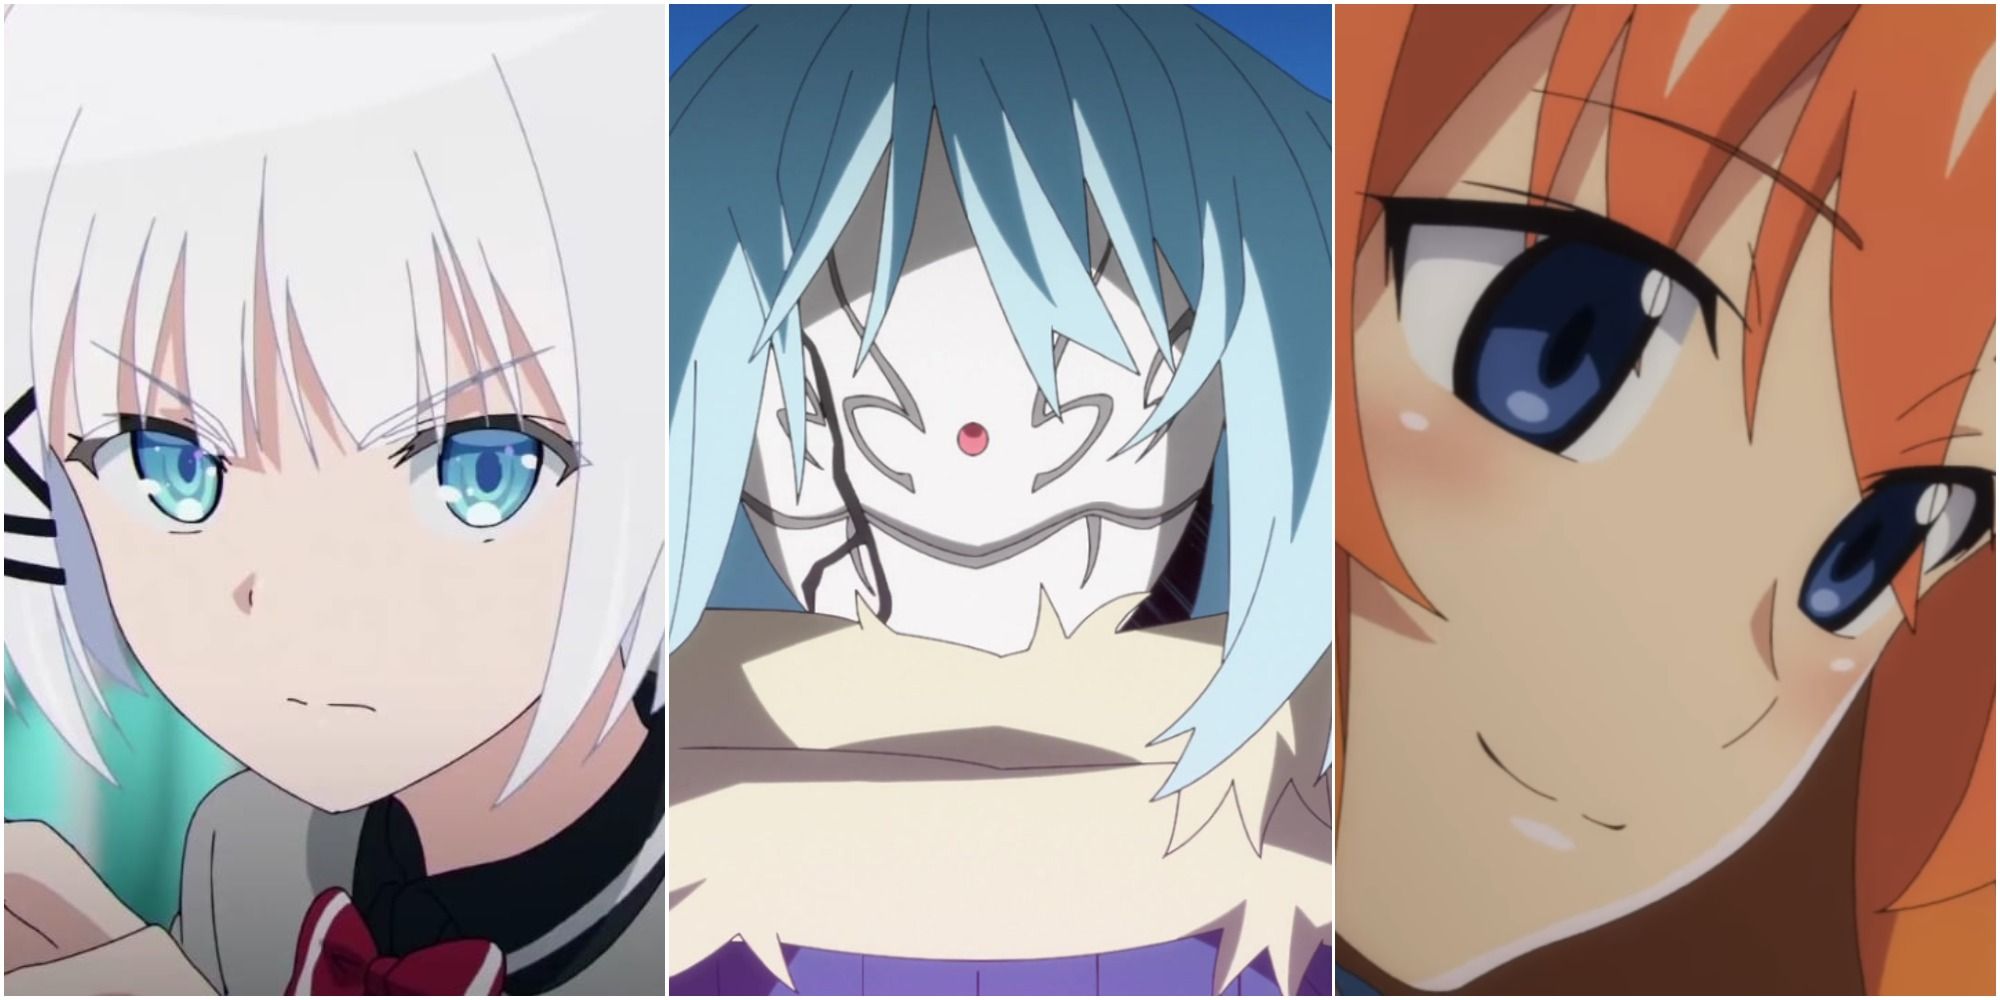 10 Most Anticipated Anime Of Summer 2021, According To MyAnimeList